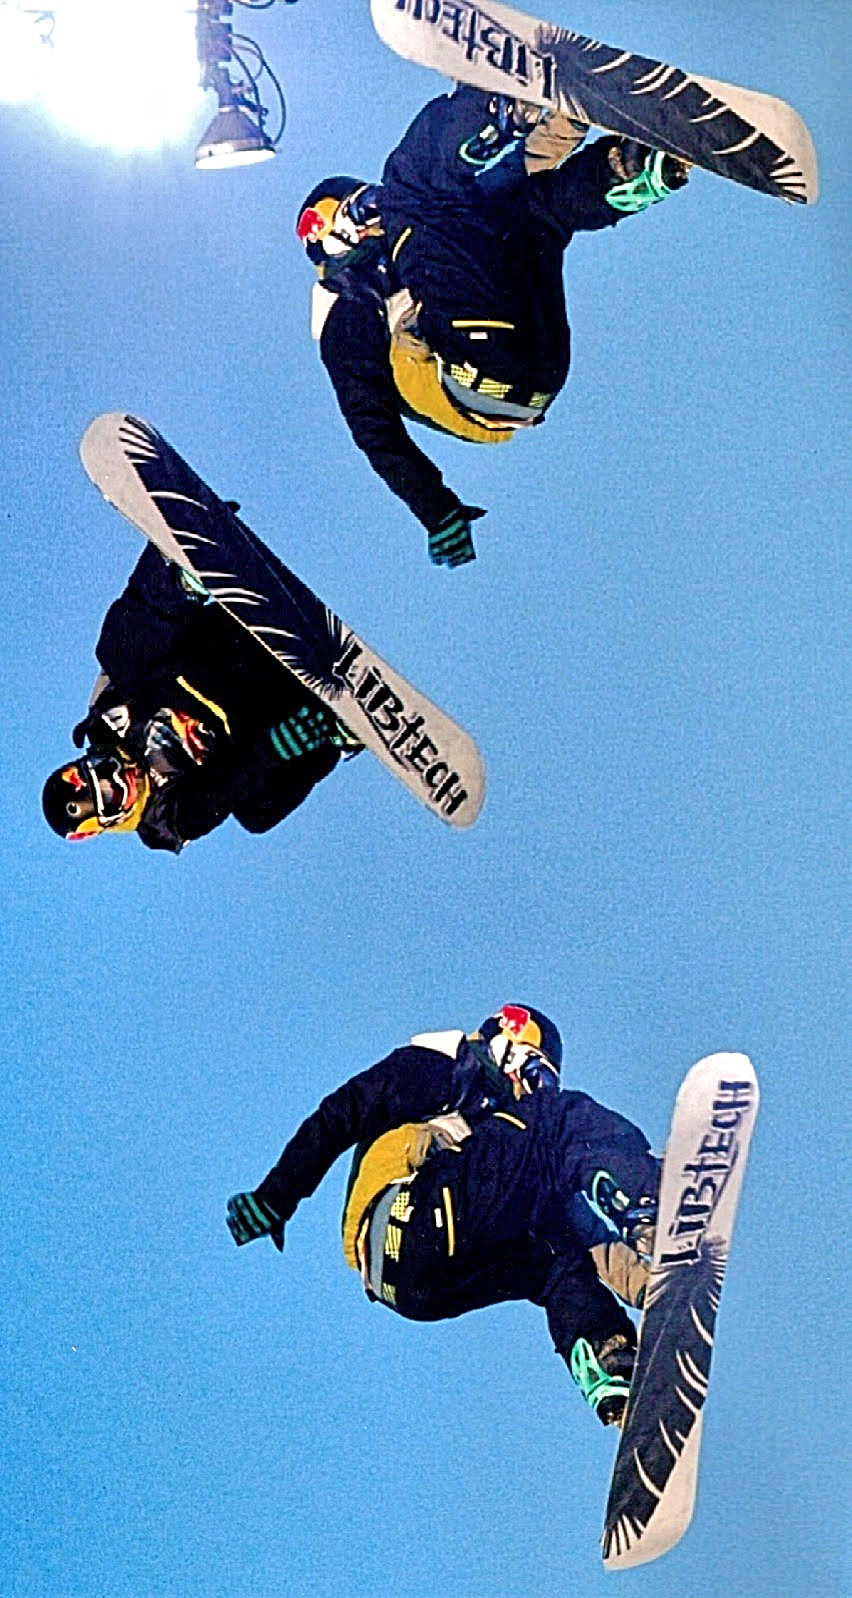 Red Bull professional snowboarders